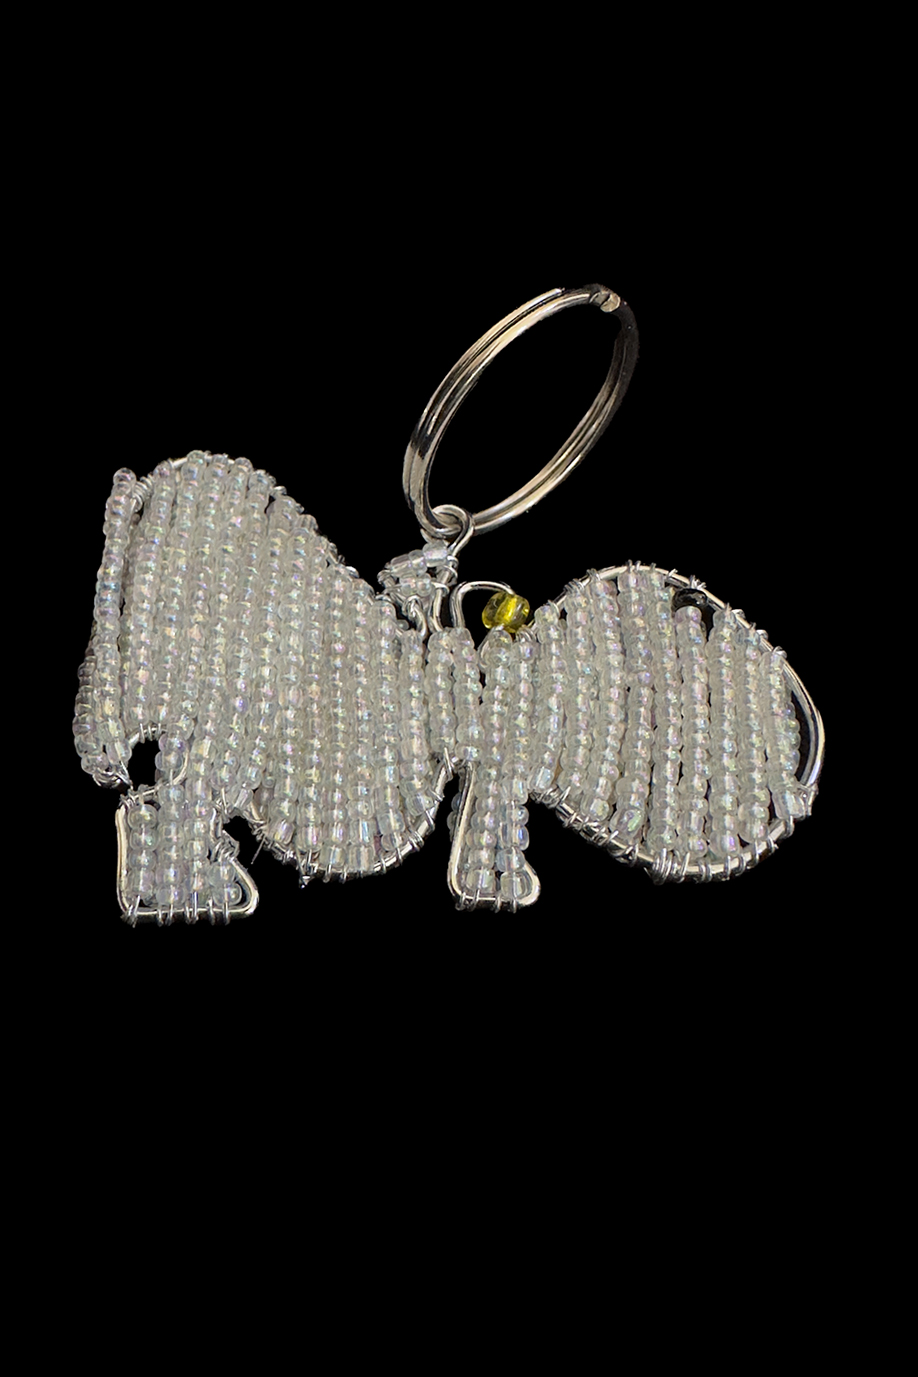 Bead and Wire Hippo Key Ring - South Africa (only 1 left!)